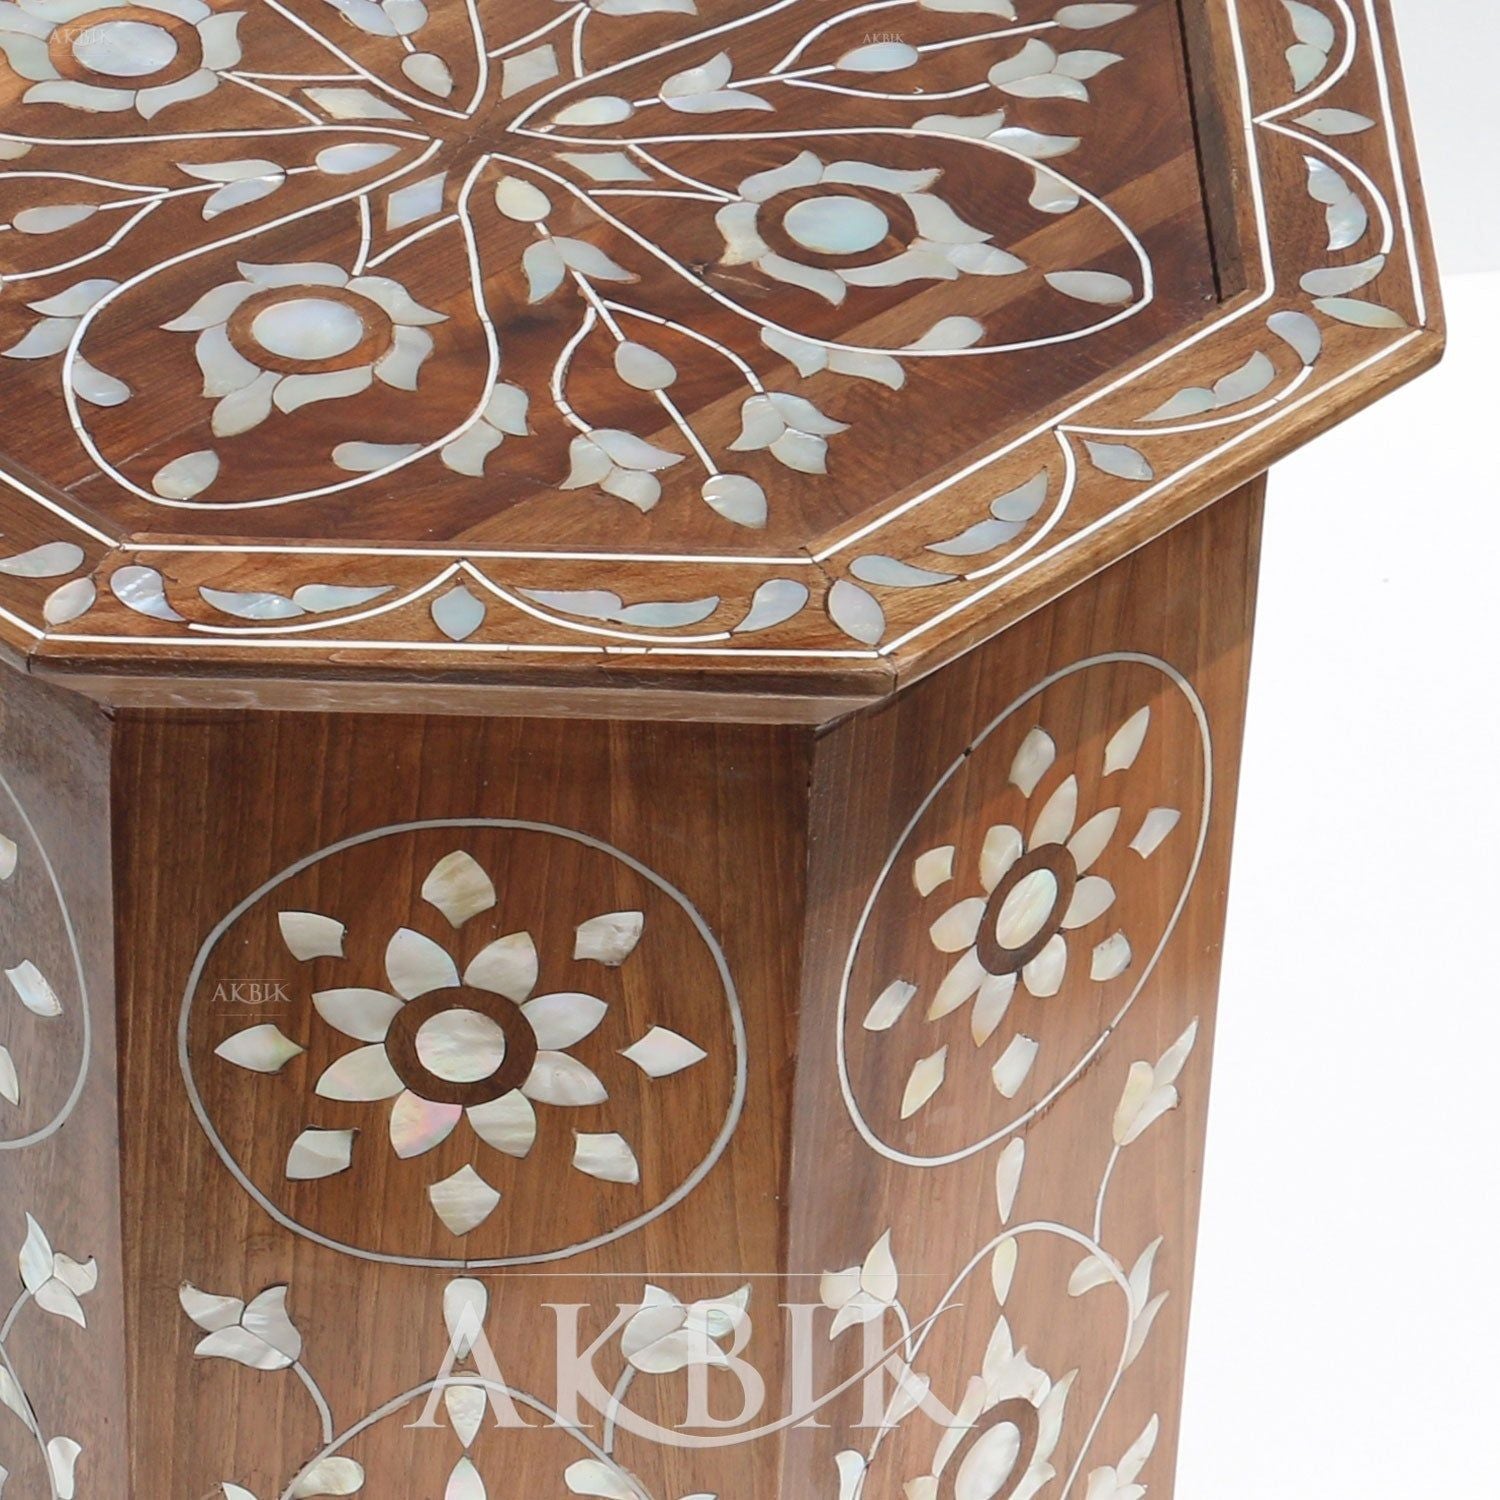 MOTHER OF PEARL INLAID SIDE TABLE - AKBIK Furniture & Design